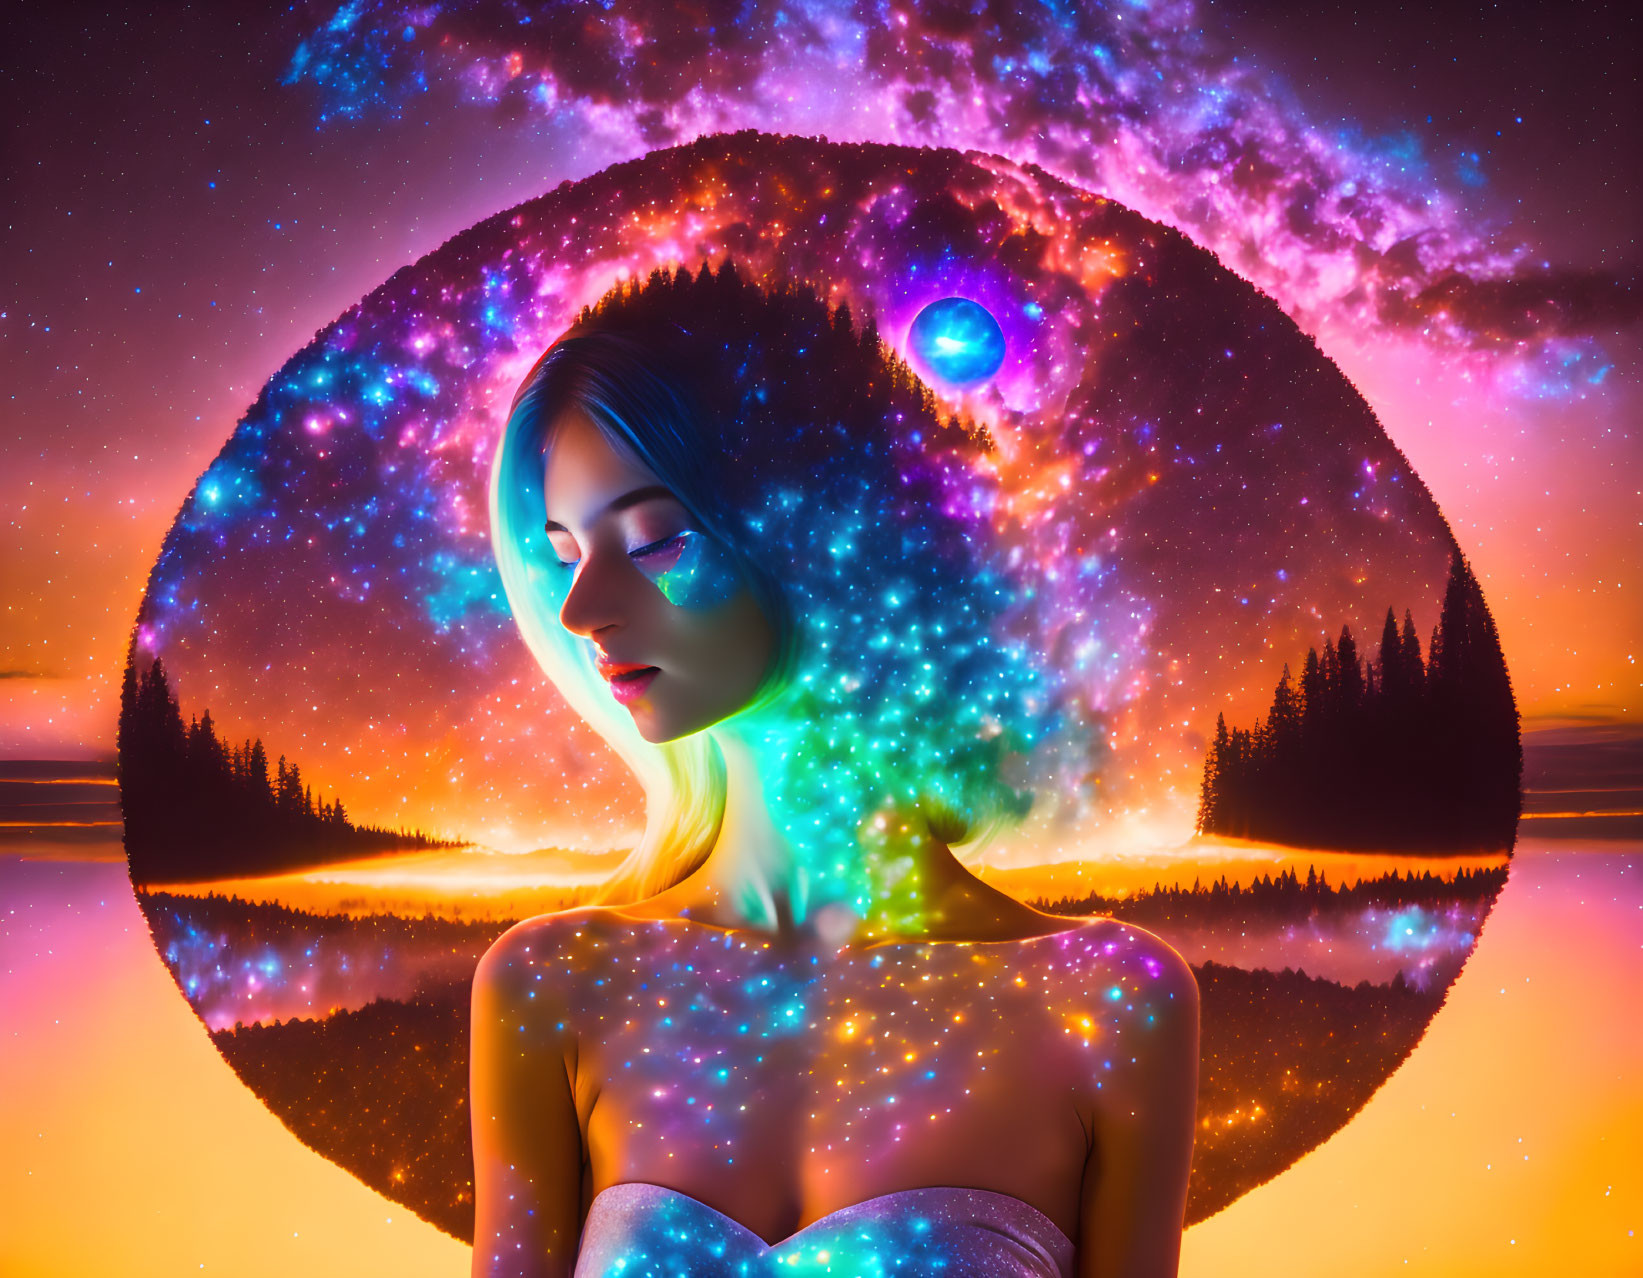 Surreal composite: Woman's silhouette with cosmic and forest backdrop